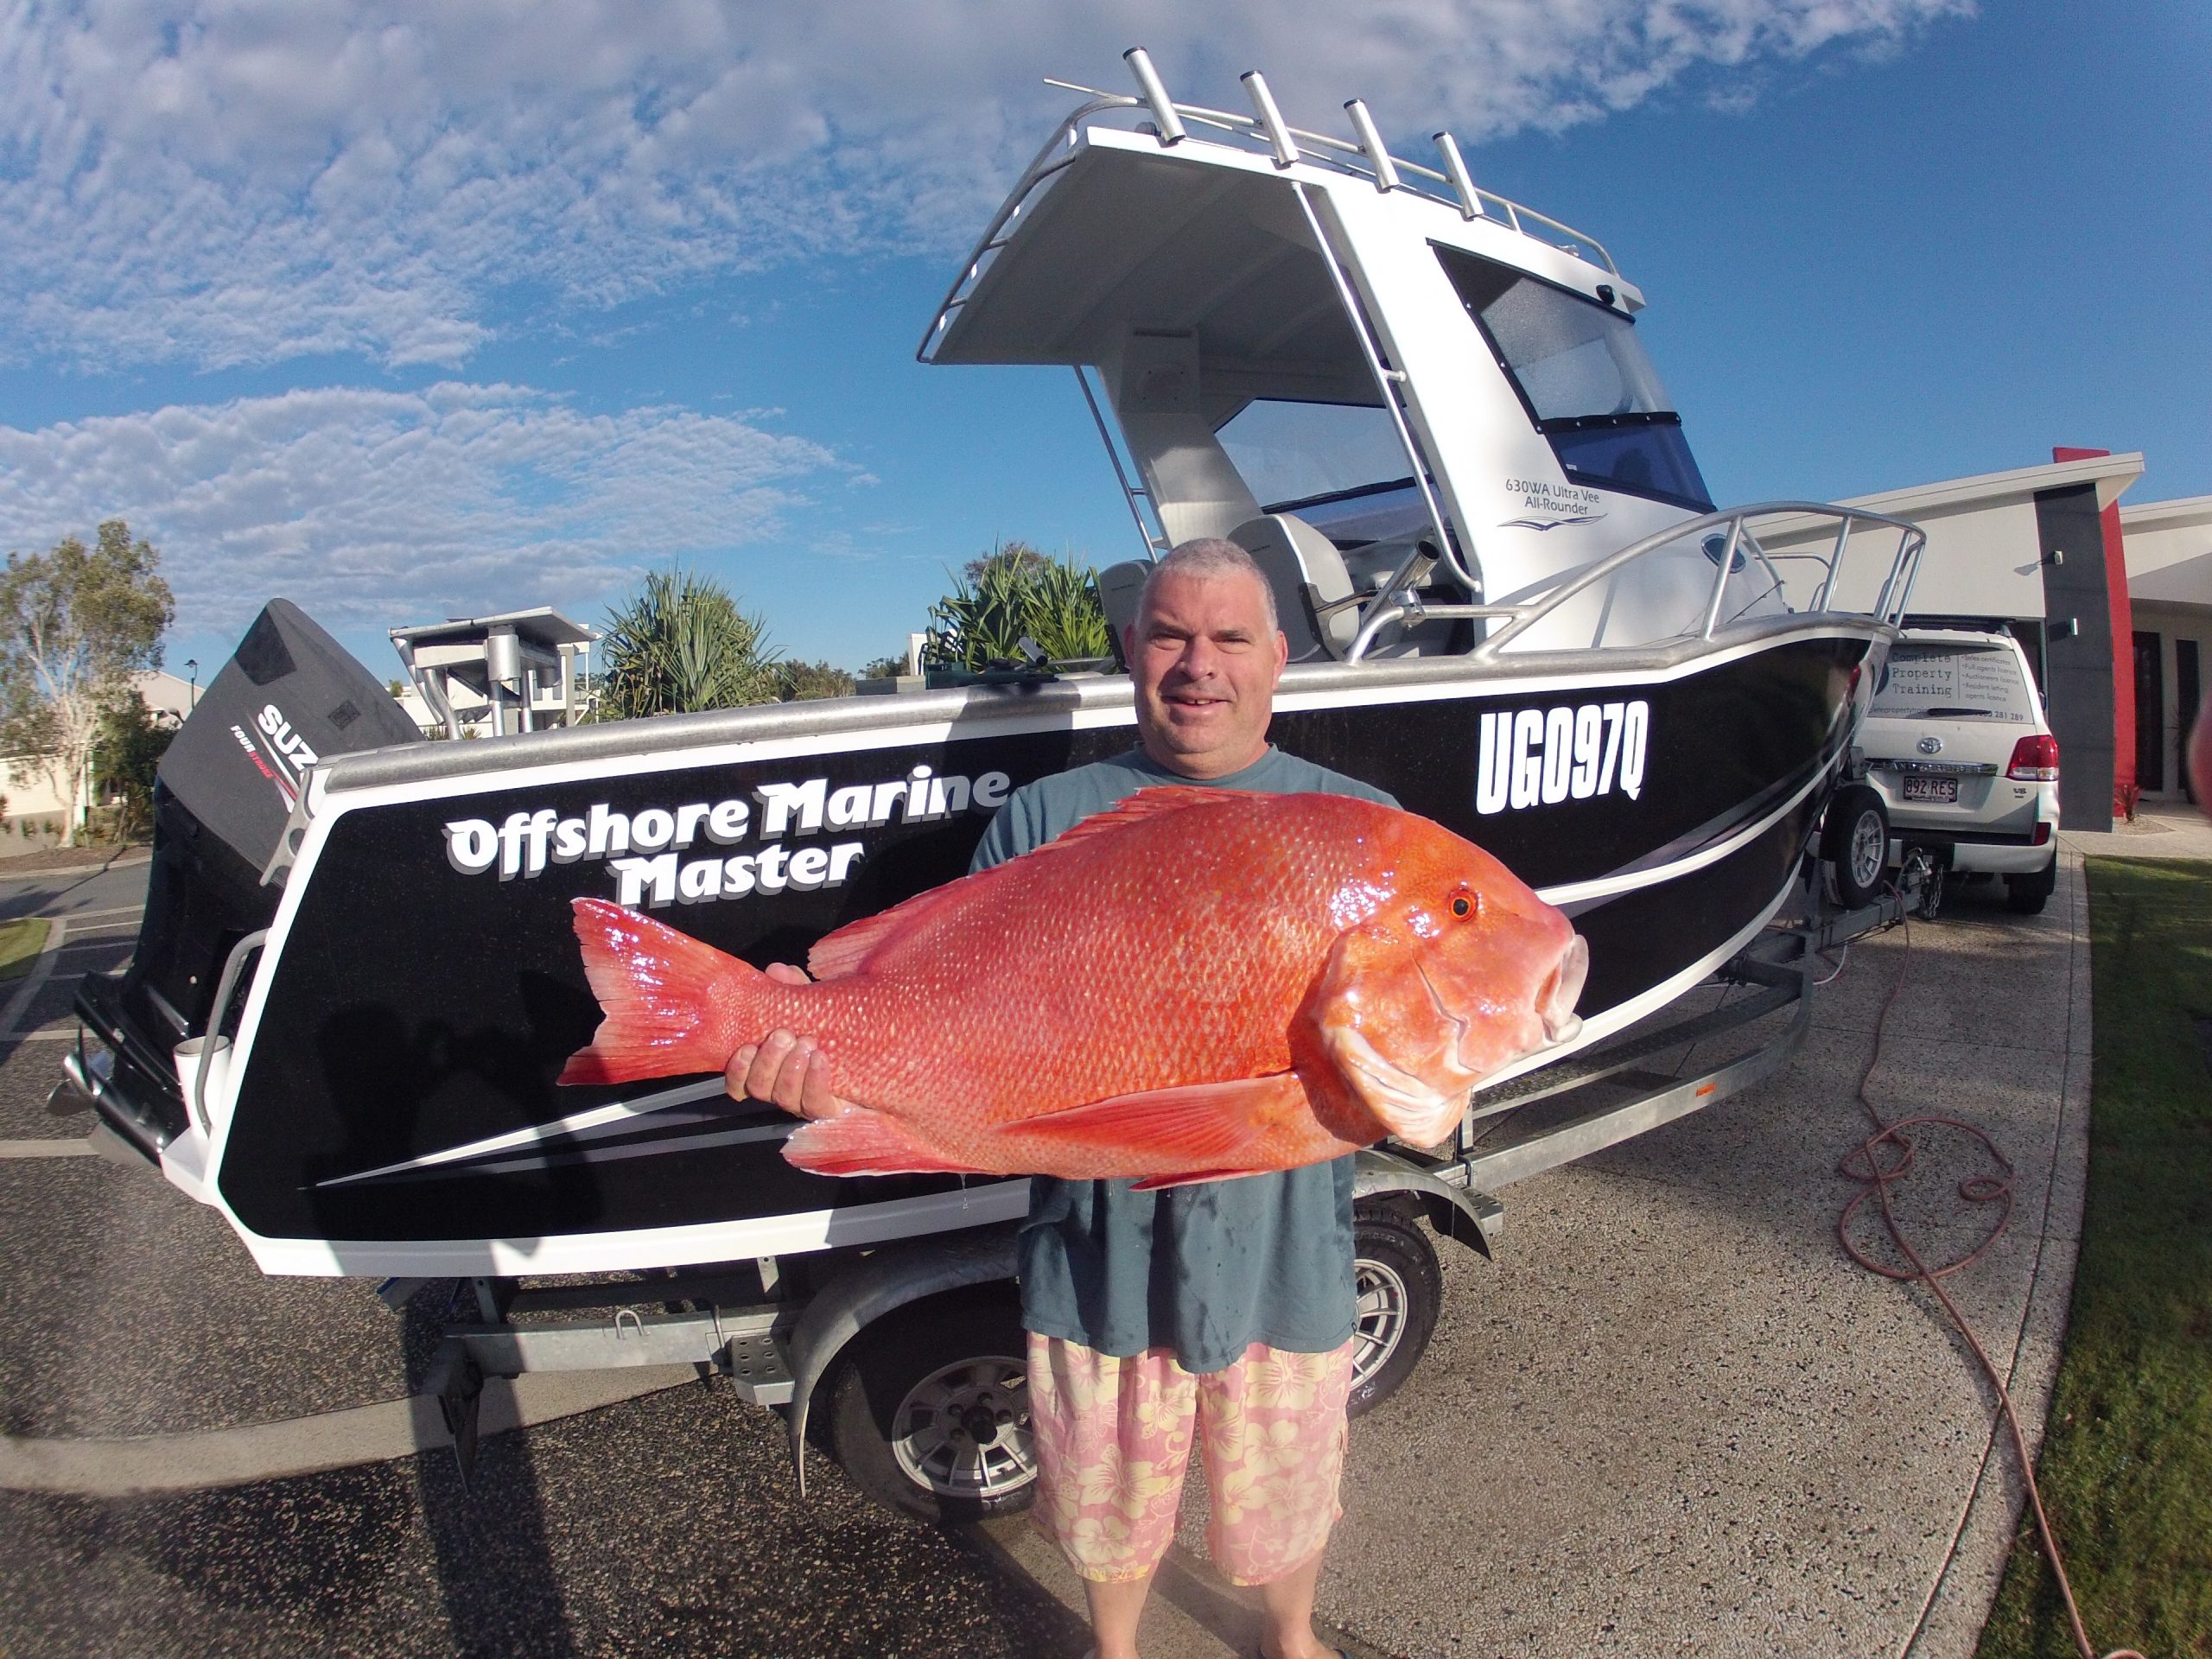 Beginners guide to offshore fishing: Fraser Island - Fish & Boat